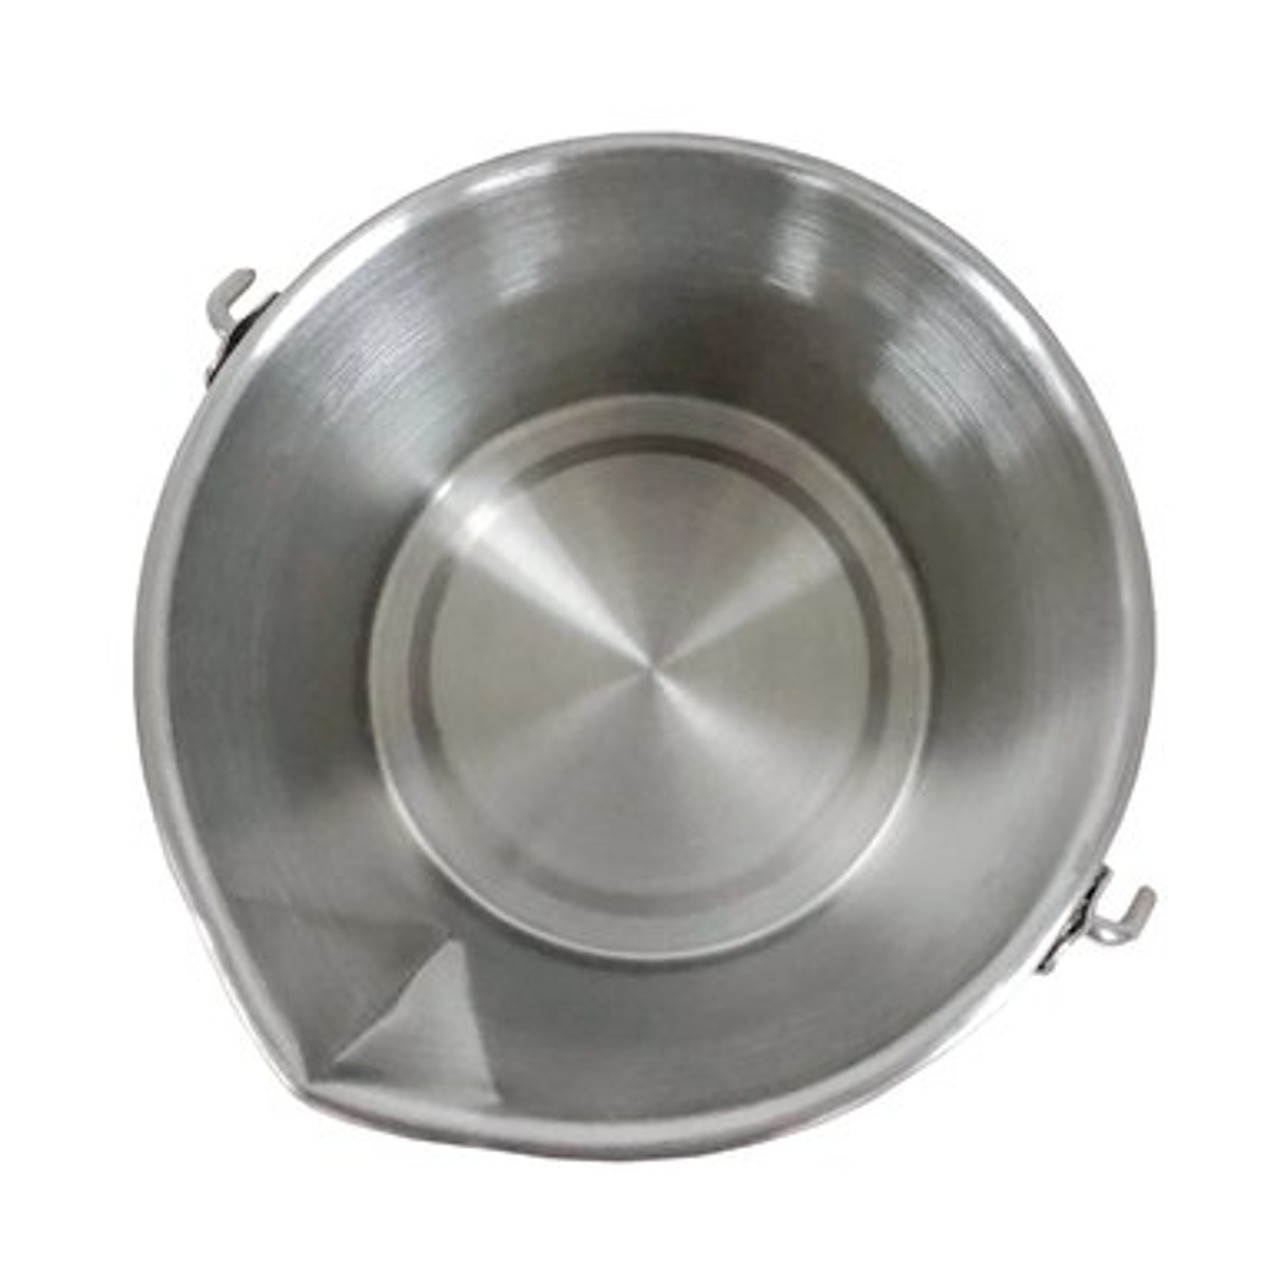 https://cdn11.bigcommerce.com/s-ovptlwt64t/images/stencil/1280x1280/products/612/2955/64OZ-STAINLESS-STEEL-BUSH-POT-AND-LID--03__83405.1602253660.jpg?c=1?imbypass=on